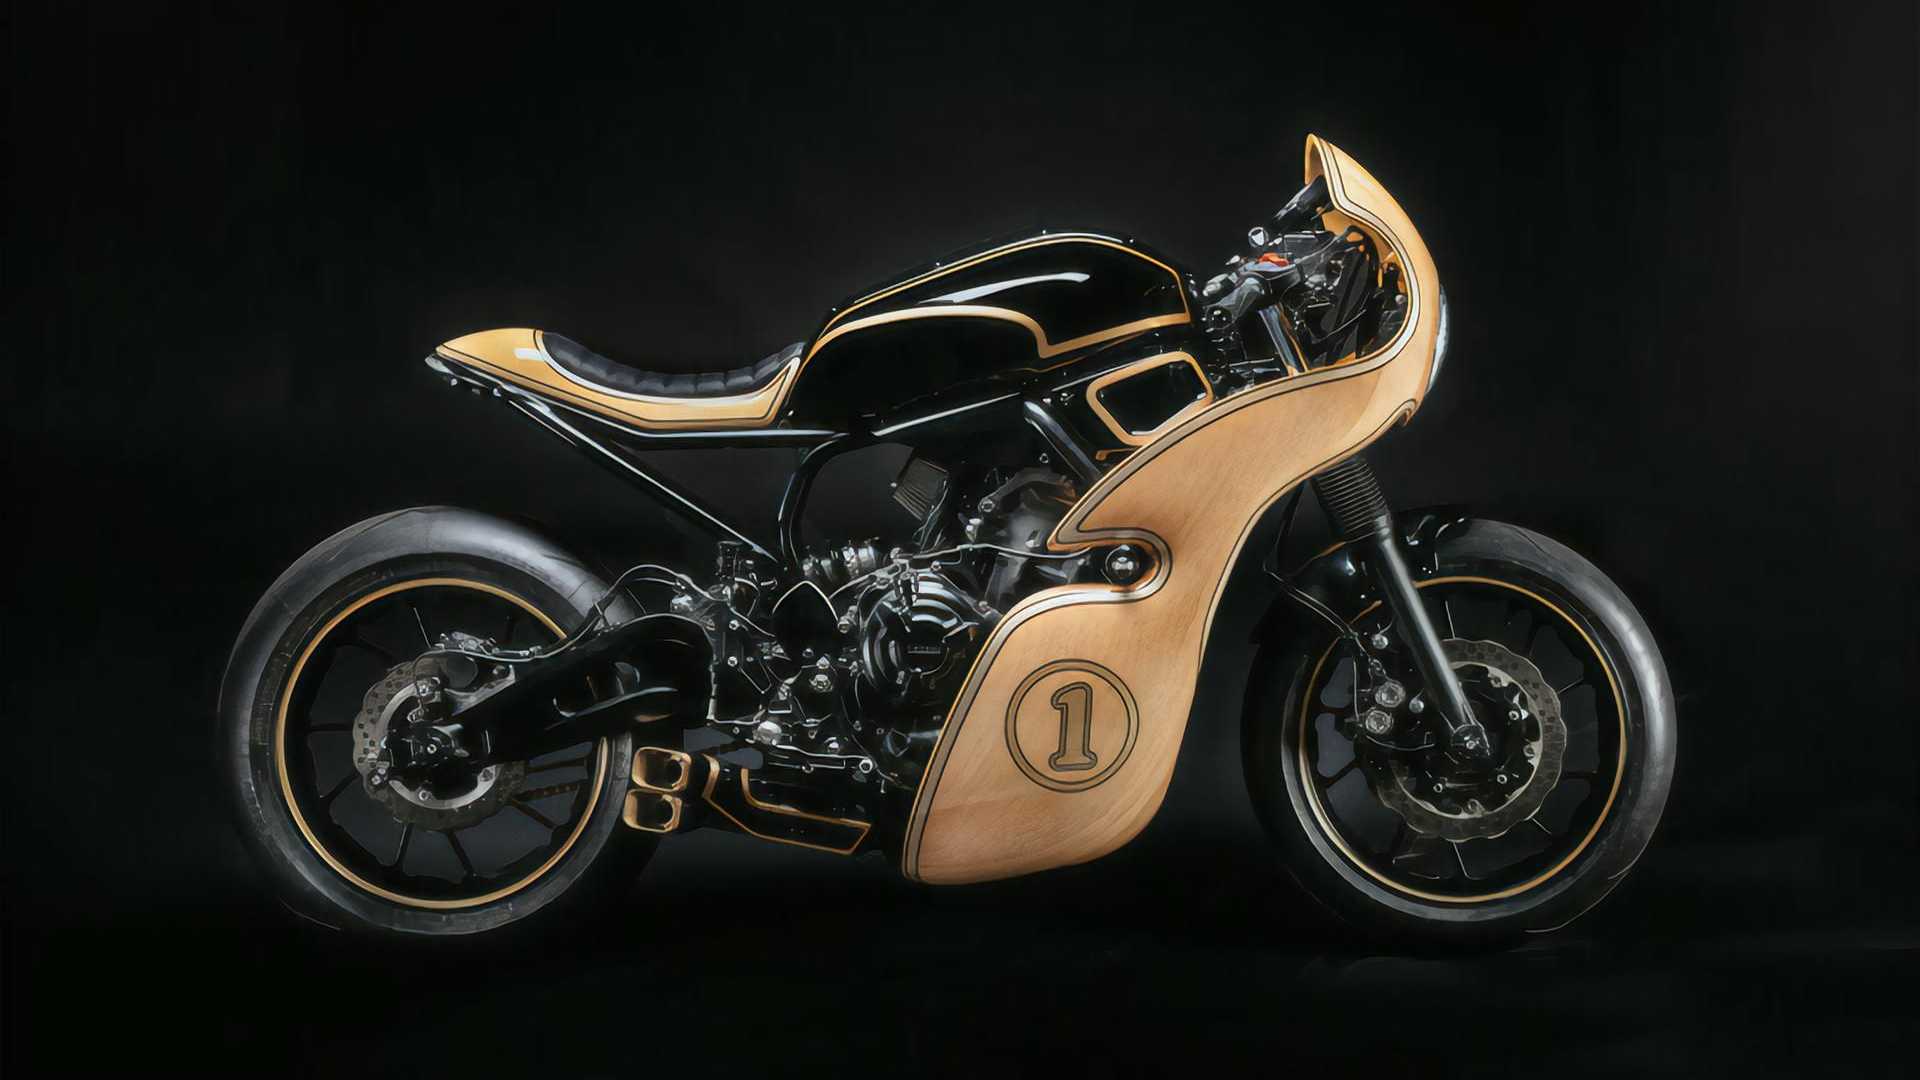 Custombike with wood fairing
- also in the MOTORCYCLES.NEWS APP